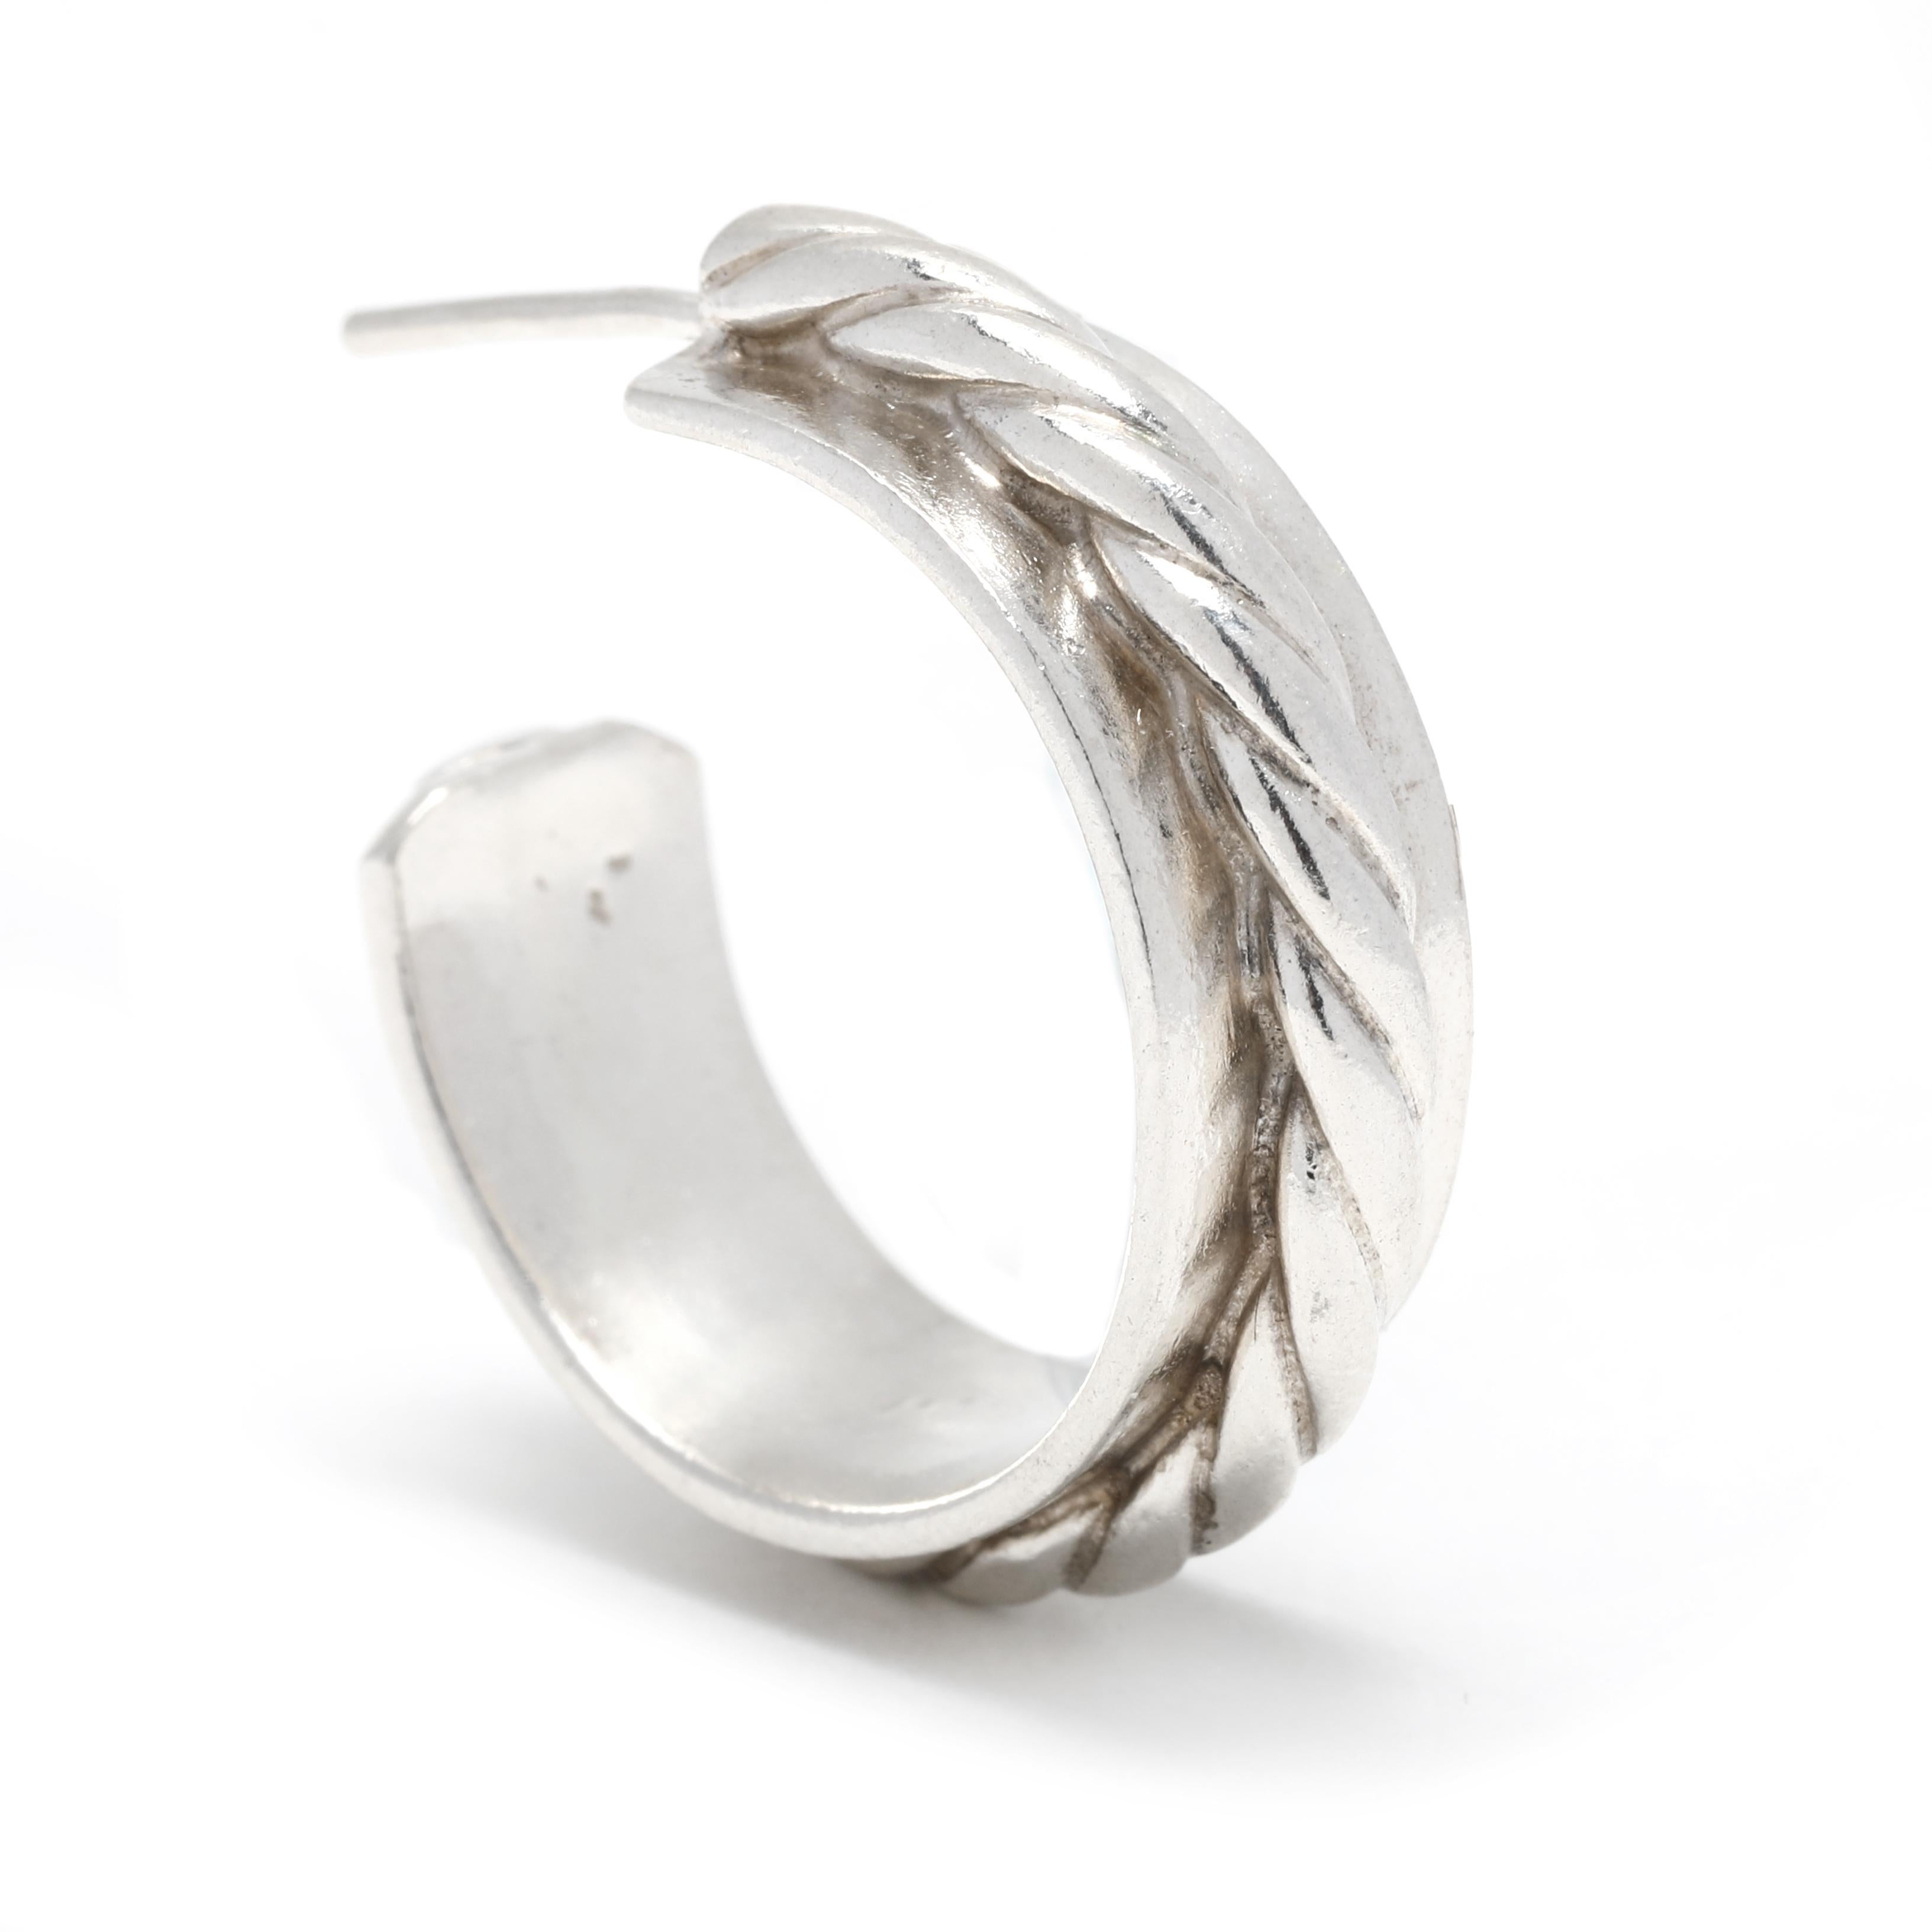 These beautiful sterling silver hoop earrings are the perfect addition to any outfit. Crafted with a solid wide rope twist detail, the vintage silver hoops have a classic look that will never go out of style. Measuring 1 inch in length, the post